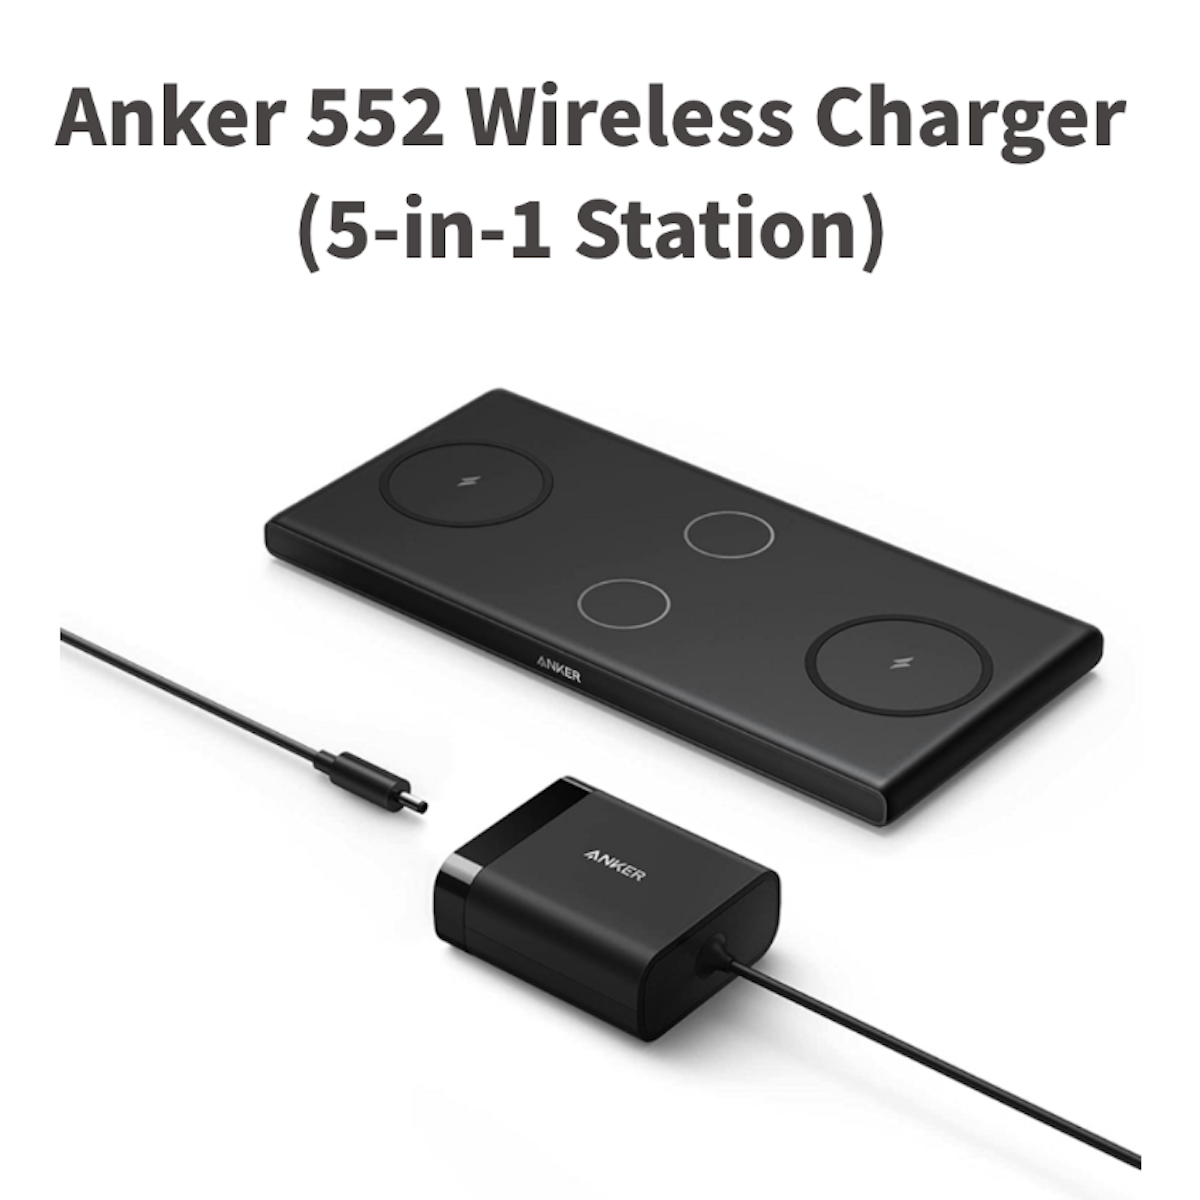 Anker 552 Wireless Charger 1200_6